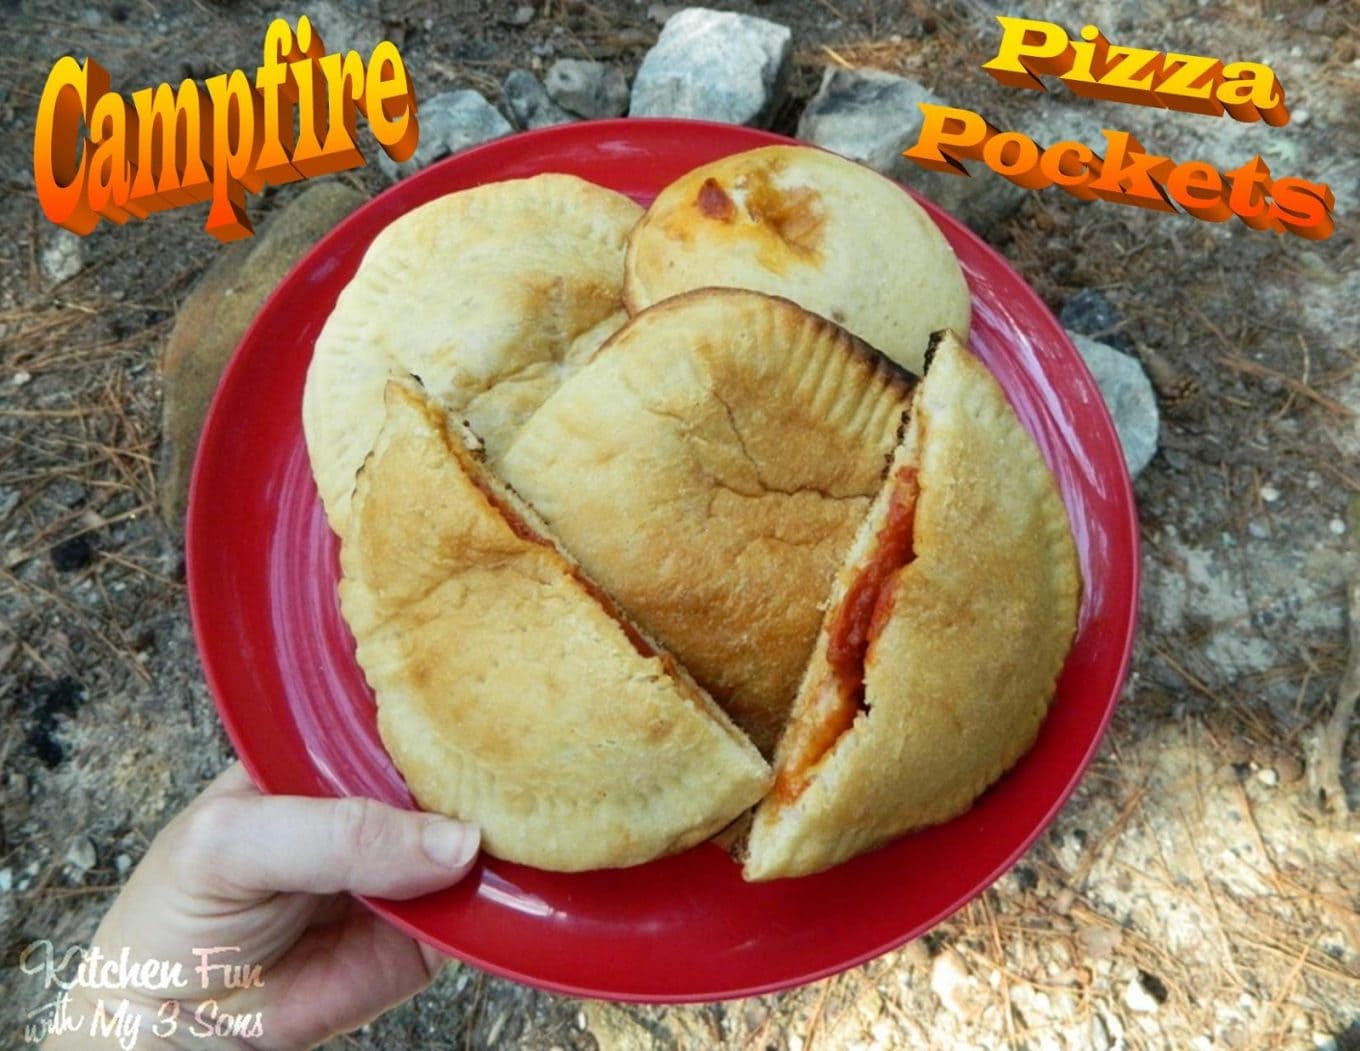 Campfire Pizza Pockets...these are the BEST Camping Recipes!